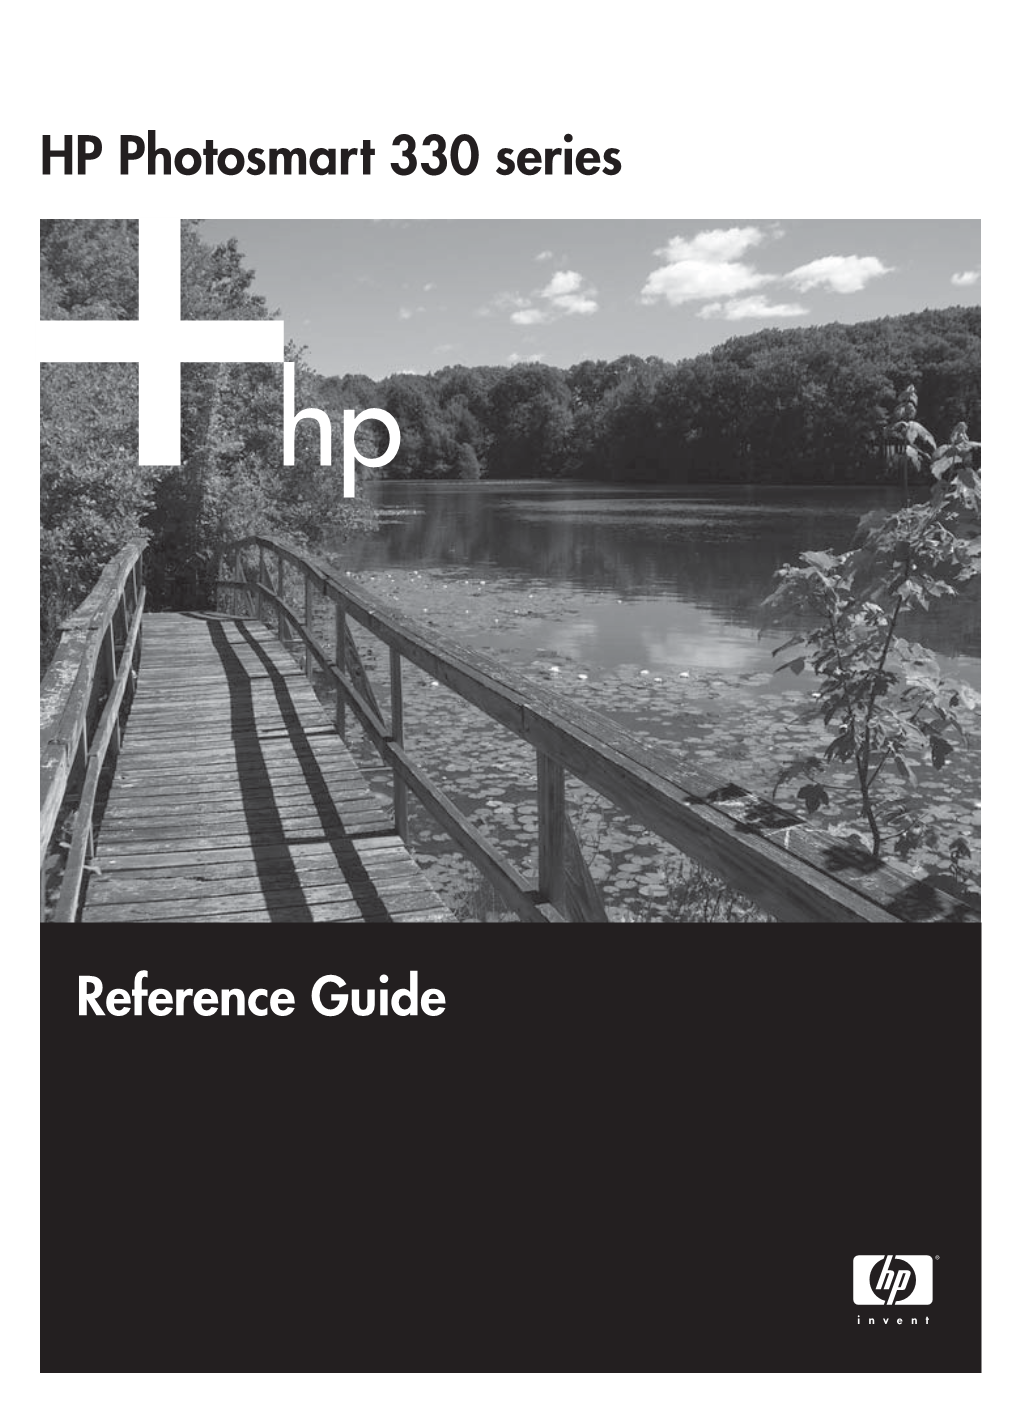 Reference Guide HP Photosmart 330 Series